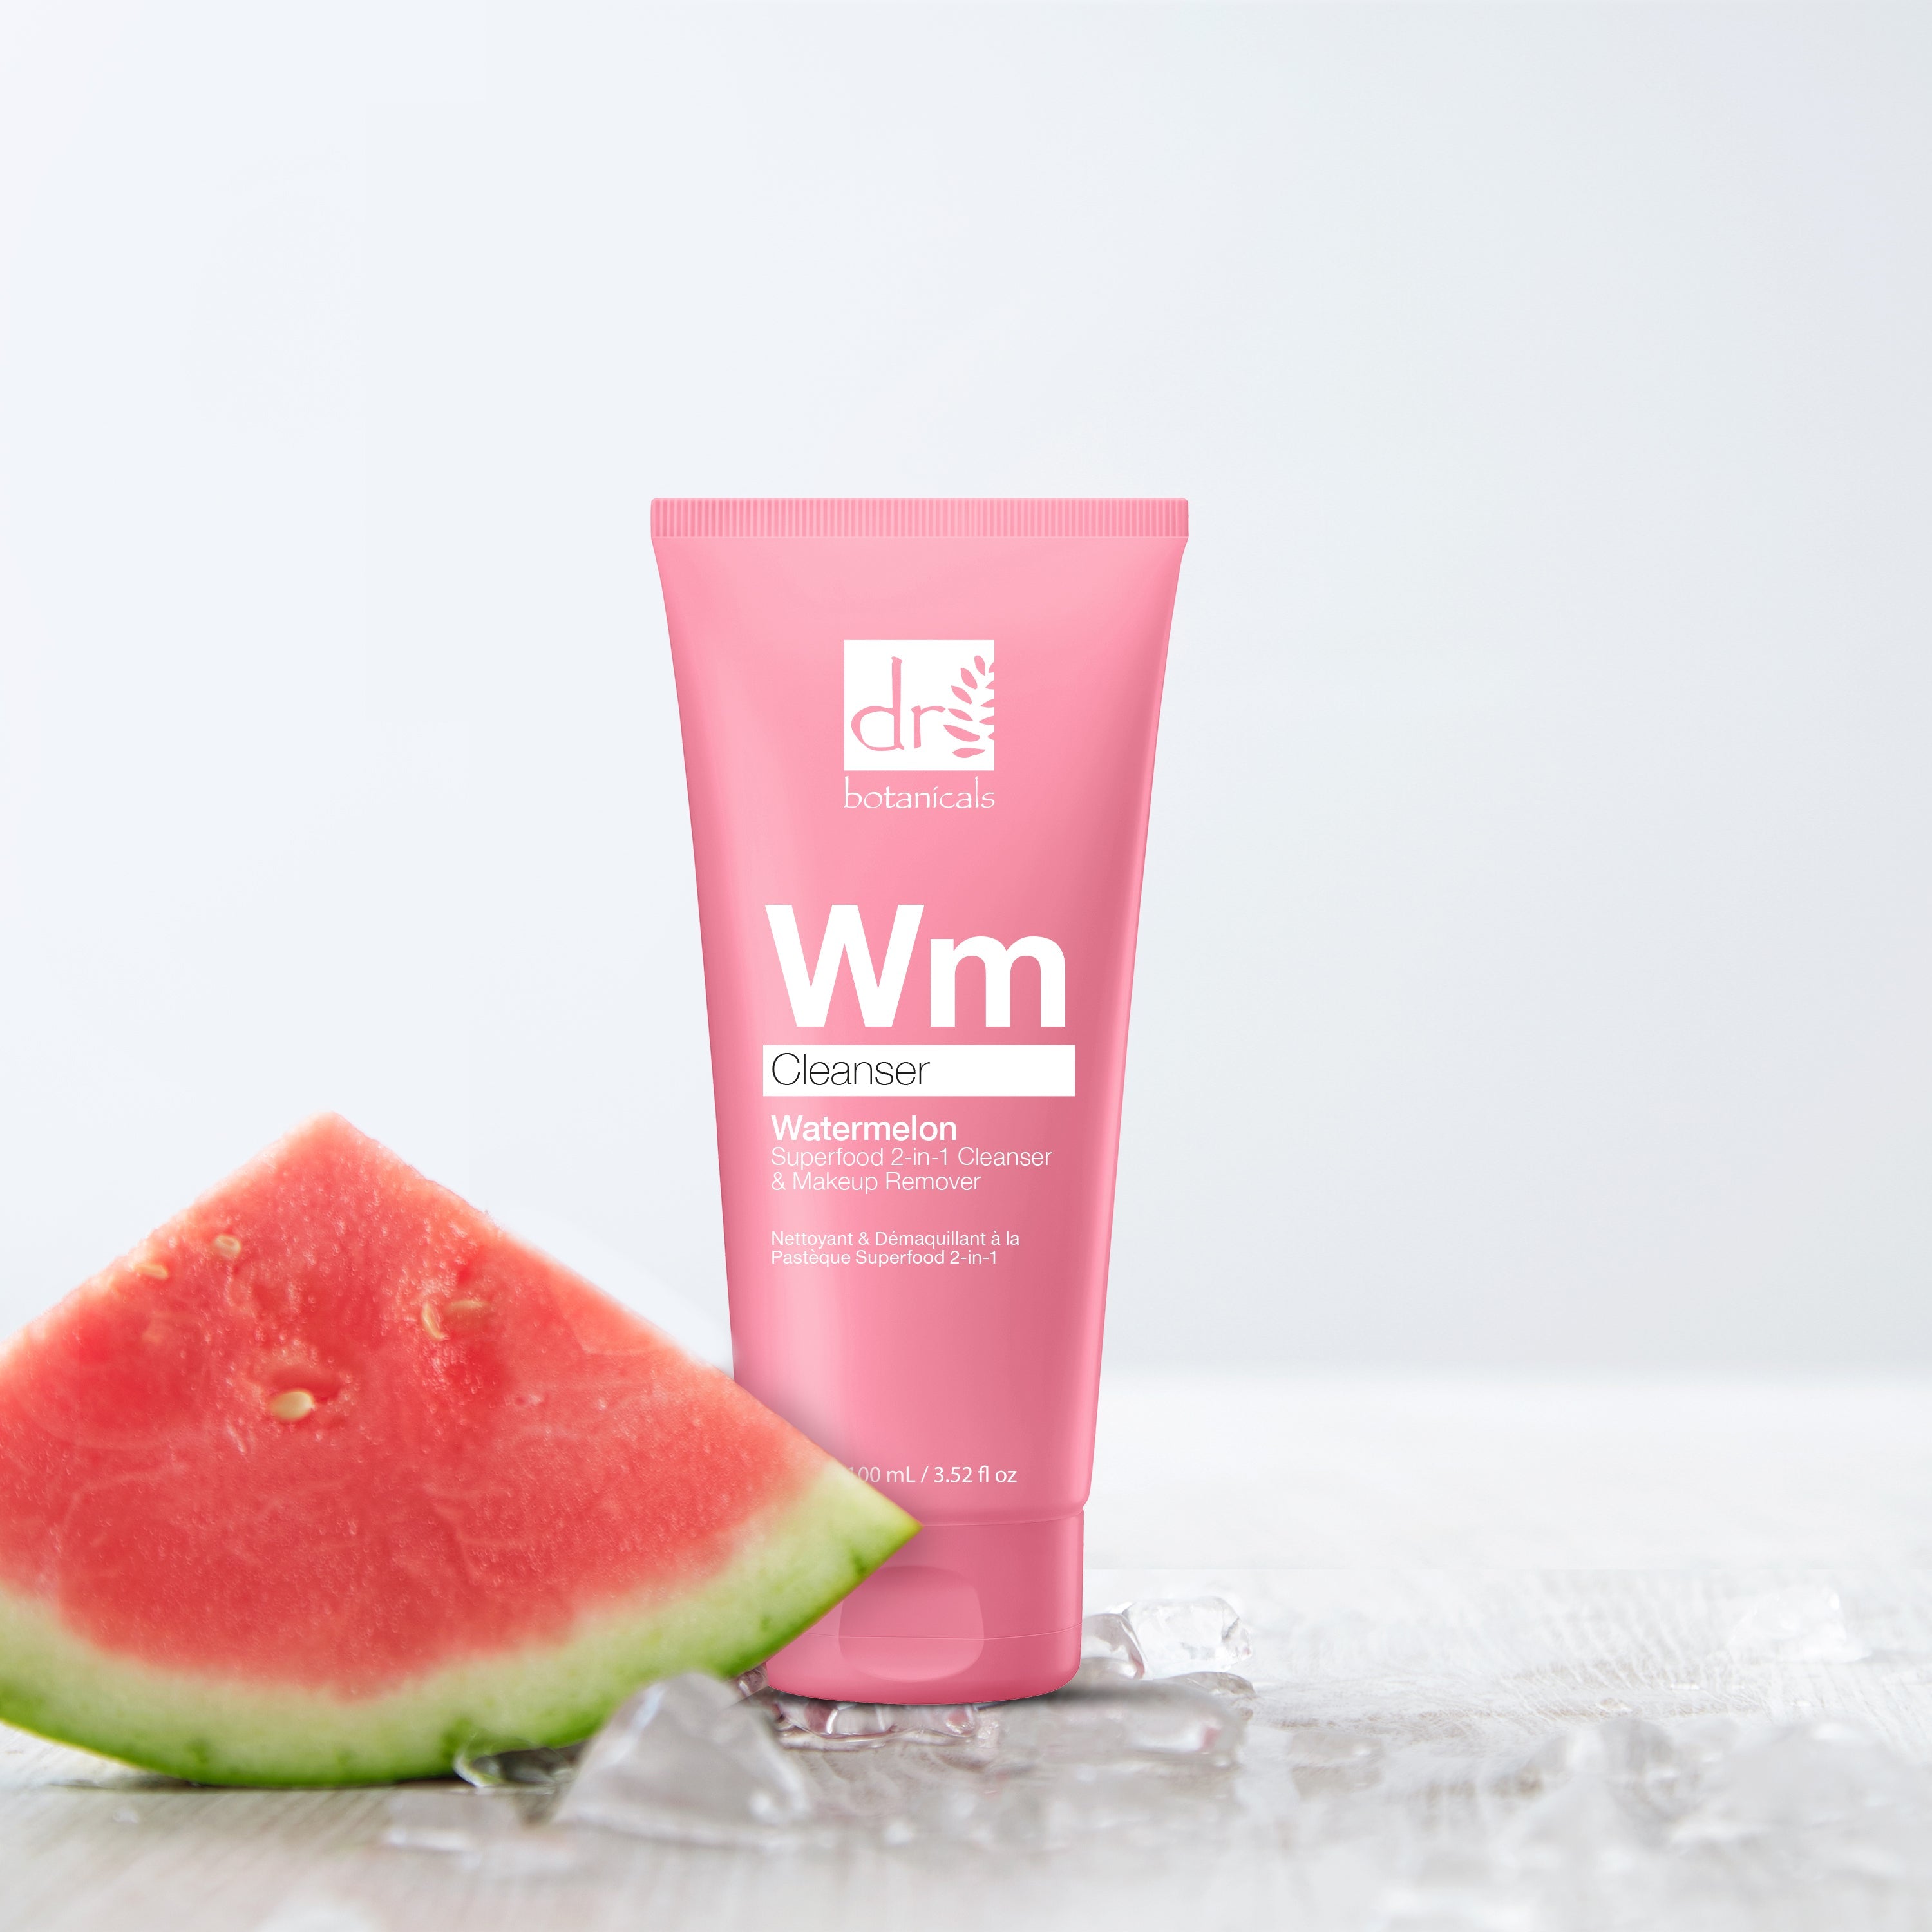 Watermelon Superfood 2-In-1 Cleanser & Makeup Remover 100ml